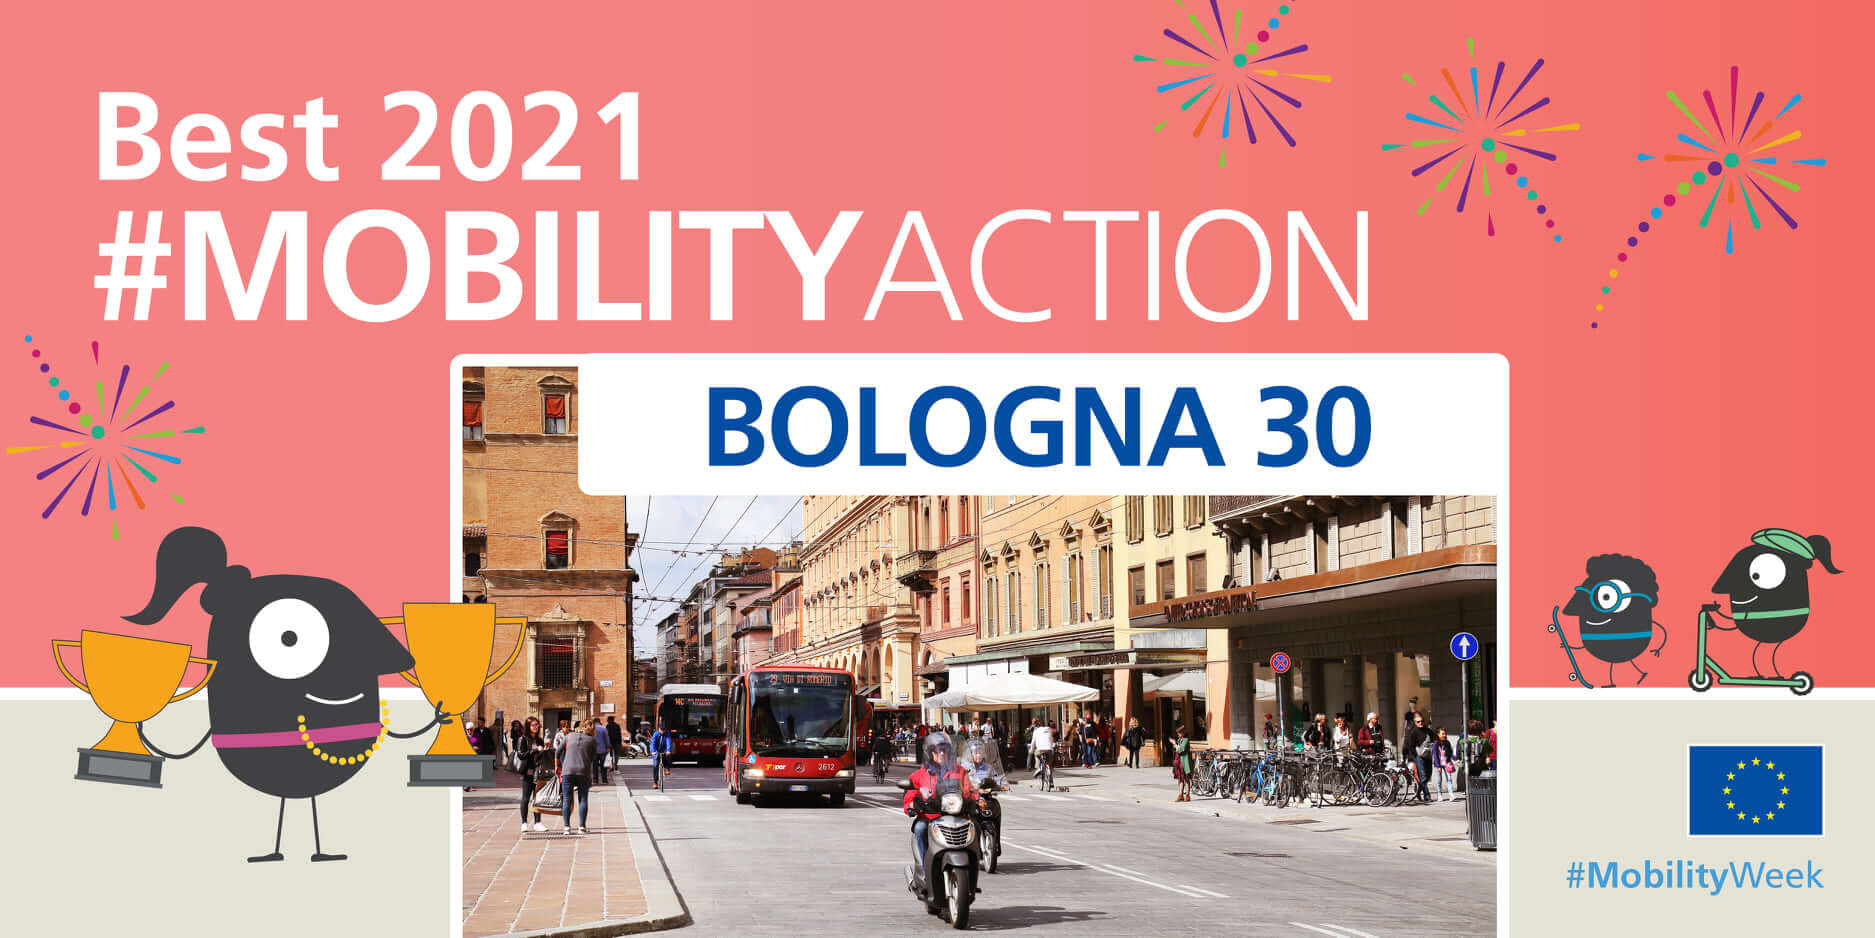 Bologna 30 Best 2021 mobility action